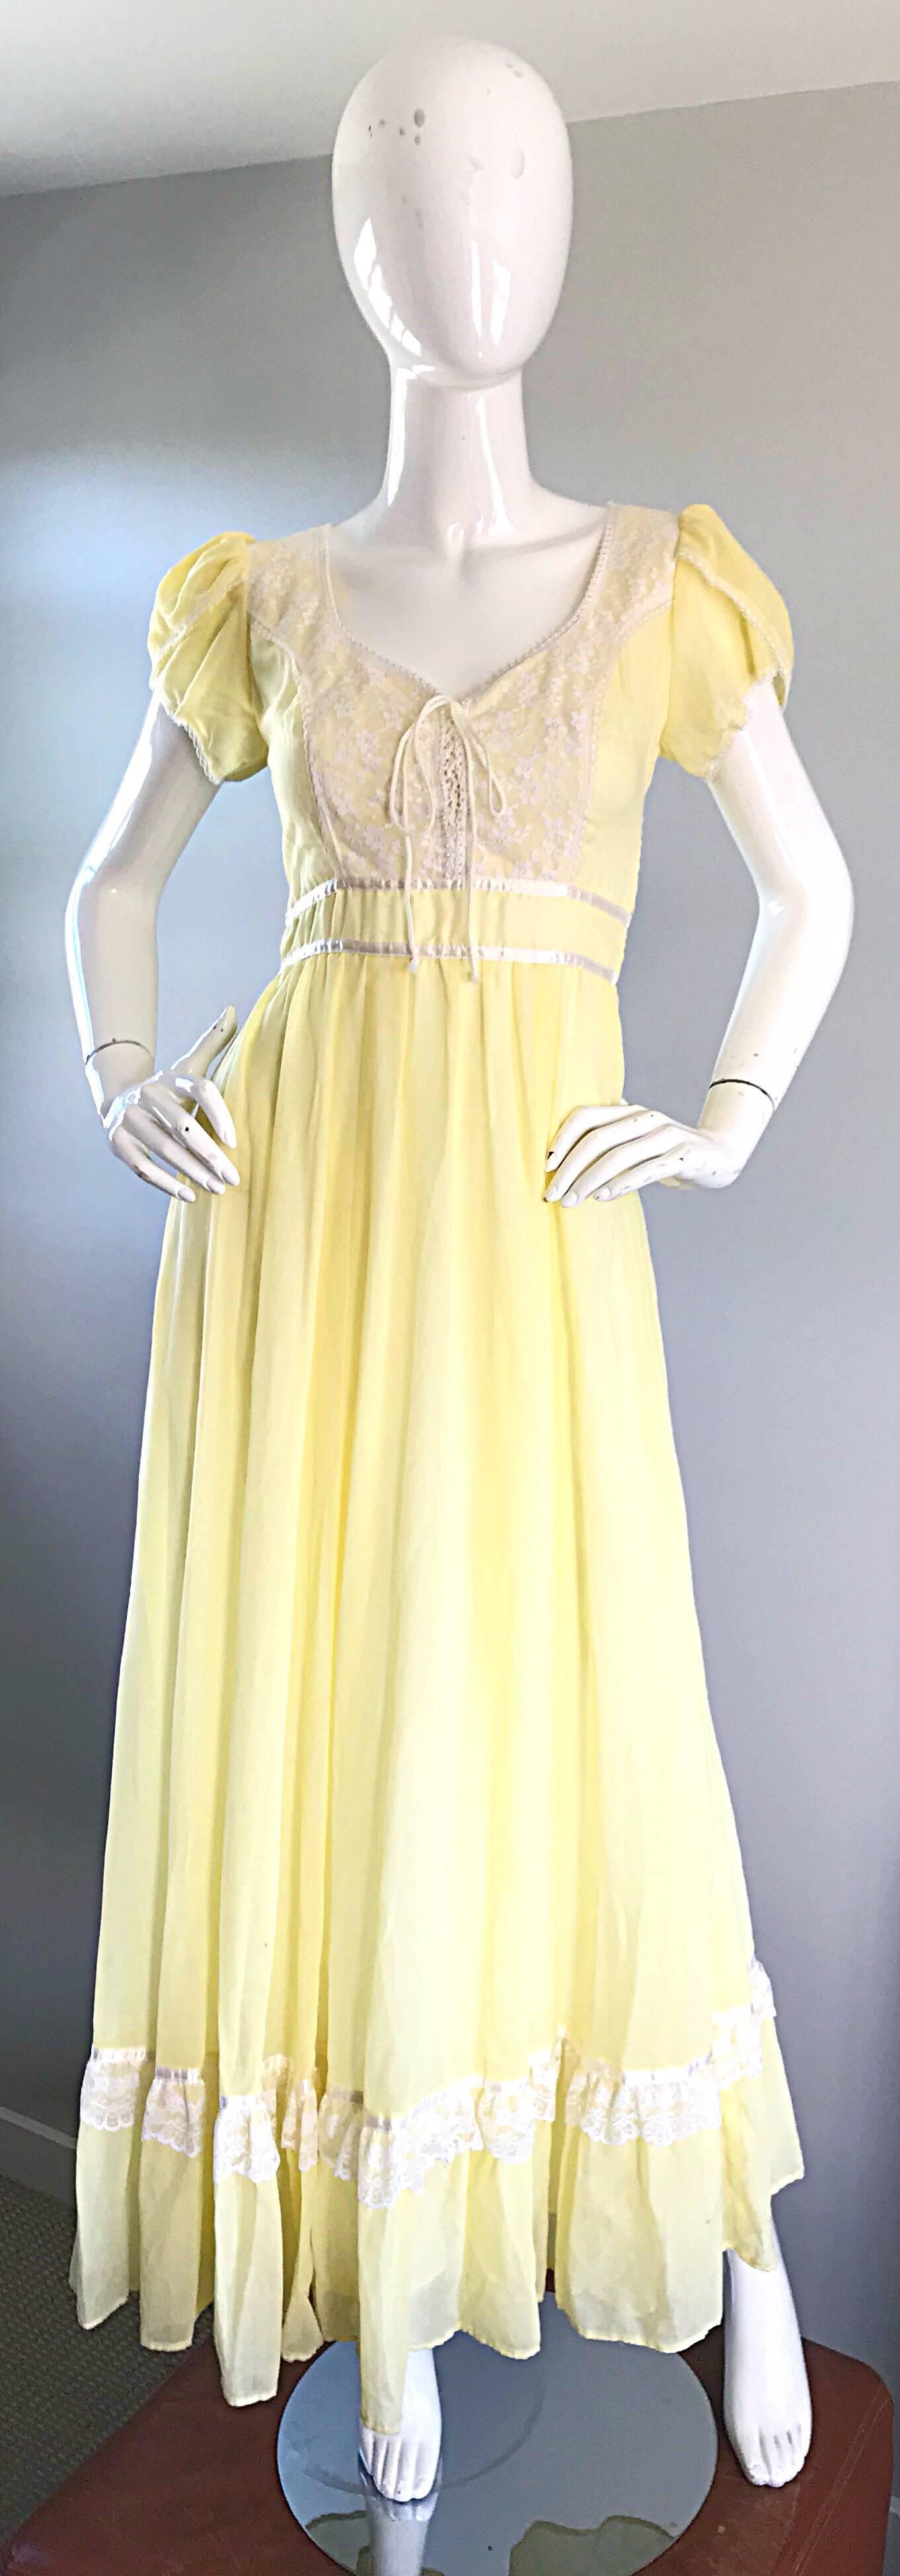 Beautiful 1970s pale yellow and white lightweight cotton voile boho maxi dress! Features a white lace bodice, encrusted with hand-sewn tiny pearls. Attached ribbon belt ties in the back. Ruffle hem also features a trim of white lace. Hidden zipper